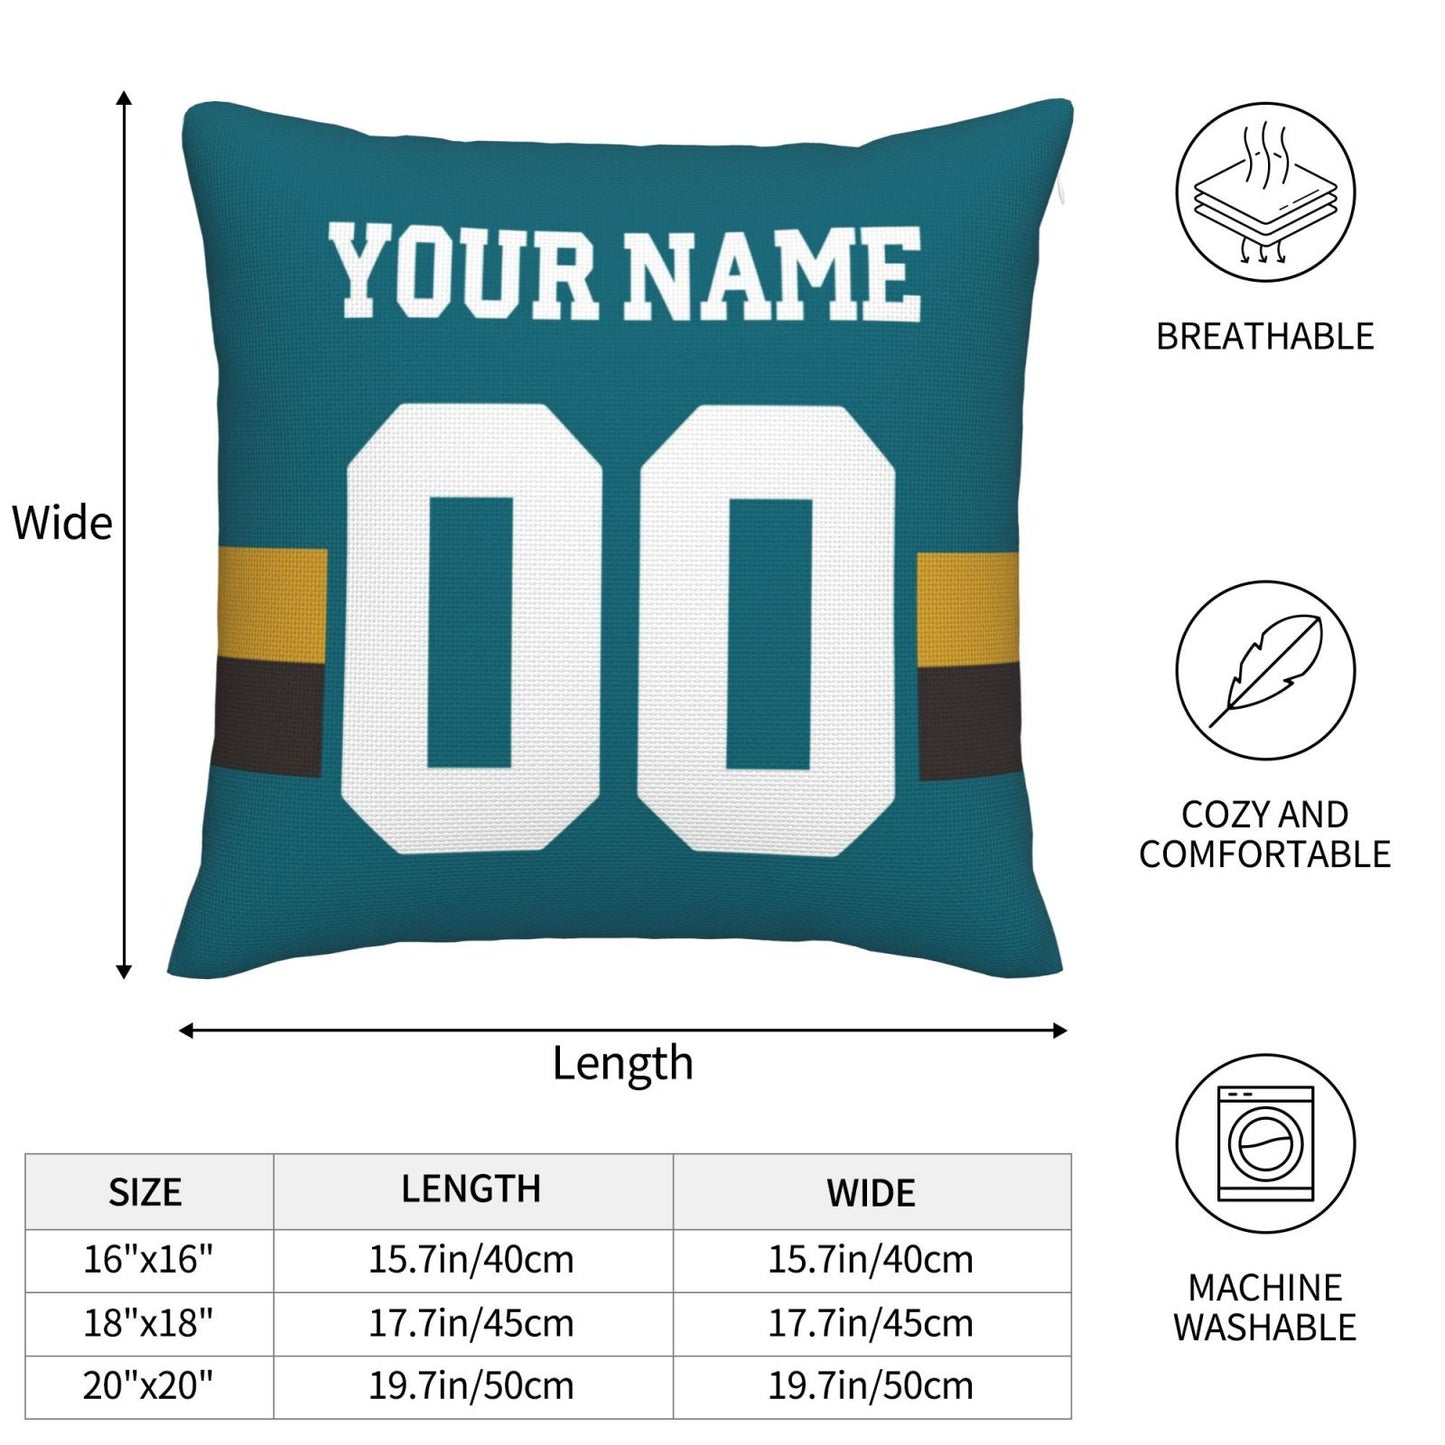 Customized Jacksonville Jaguars Football Team Decorative Throw Pillow Case Print Personalized Football Style Fans Letters & Number Teal Pillowcase Housewarming Gifts